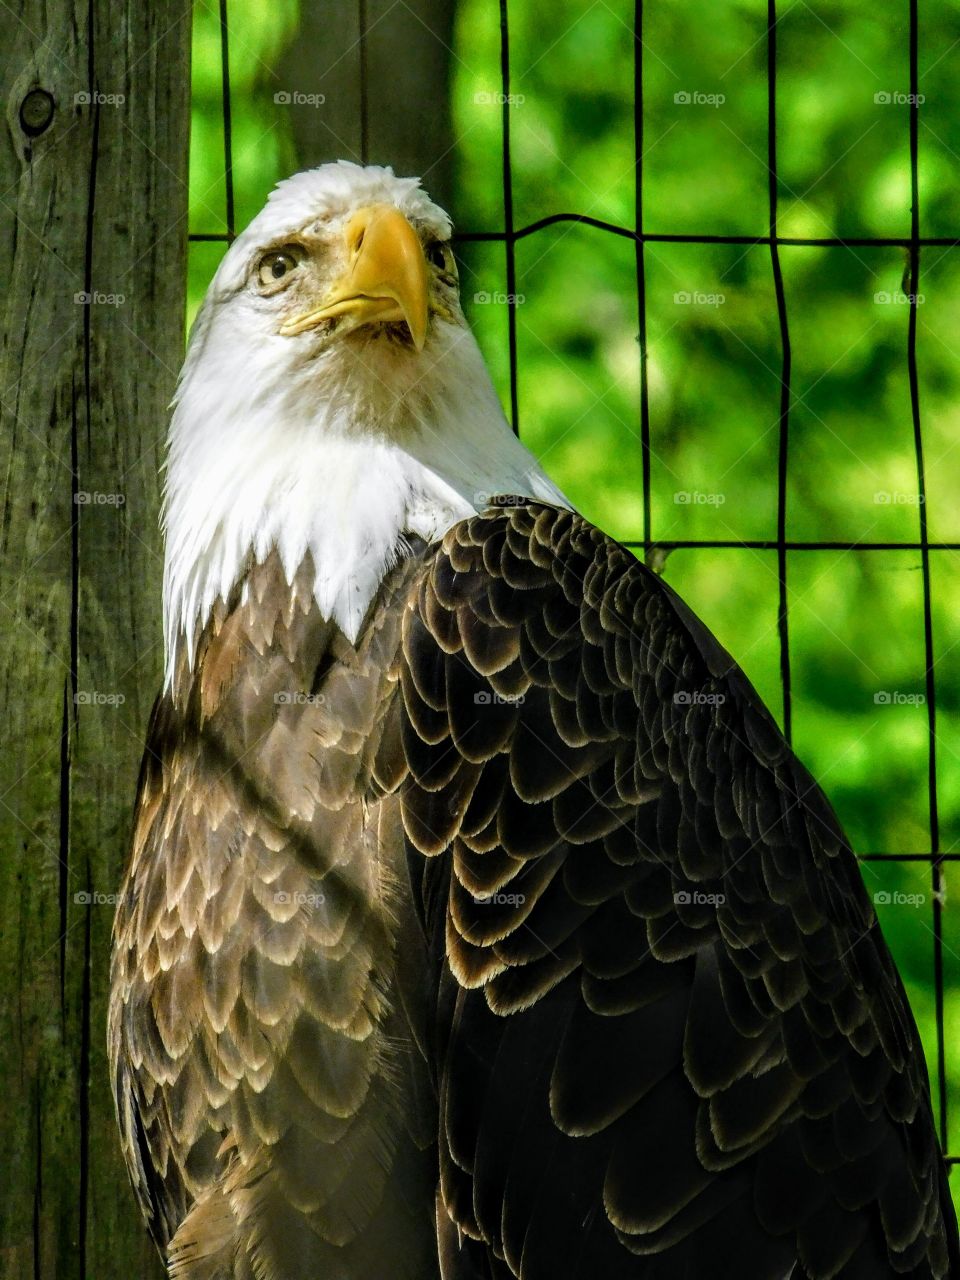 This Bald Eagle Dreams To Take Flight Again One Day